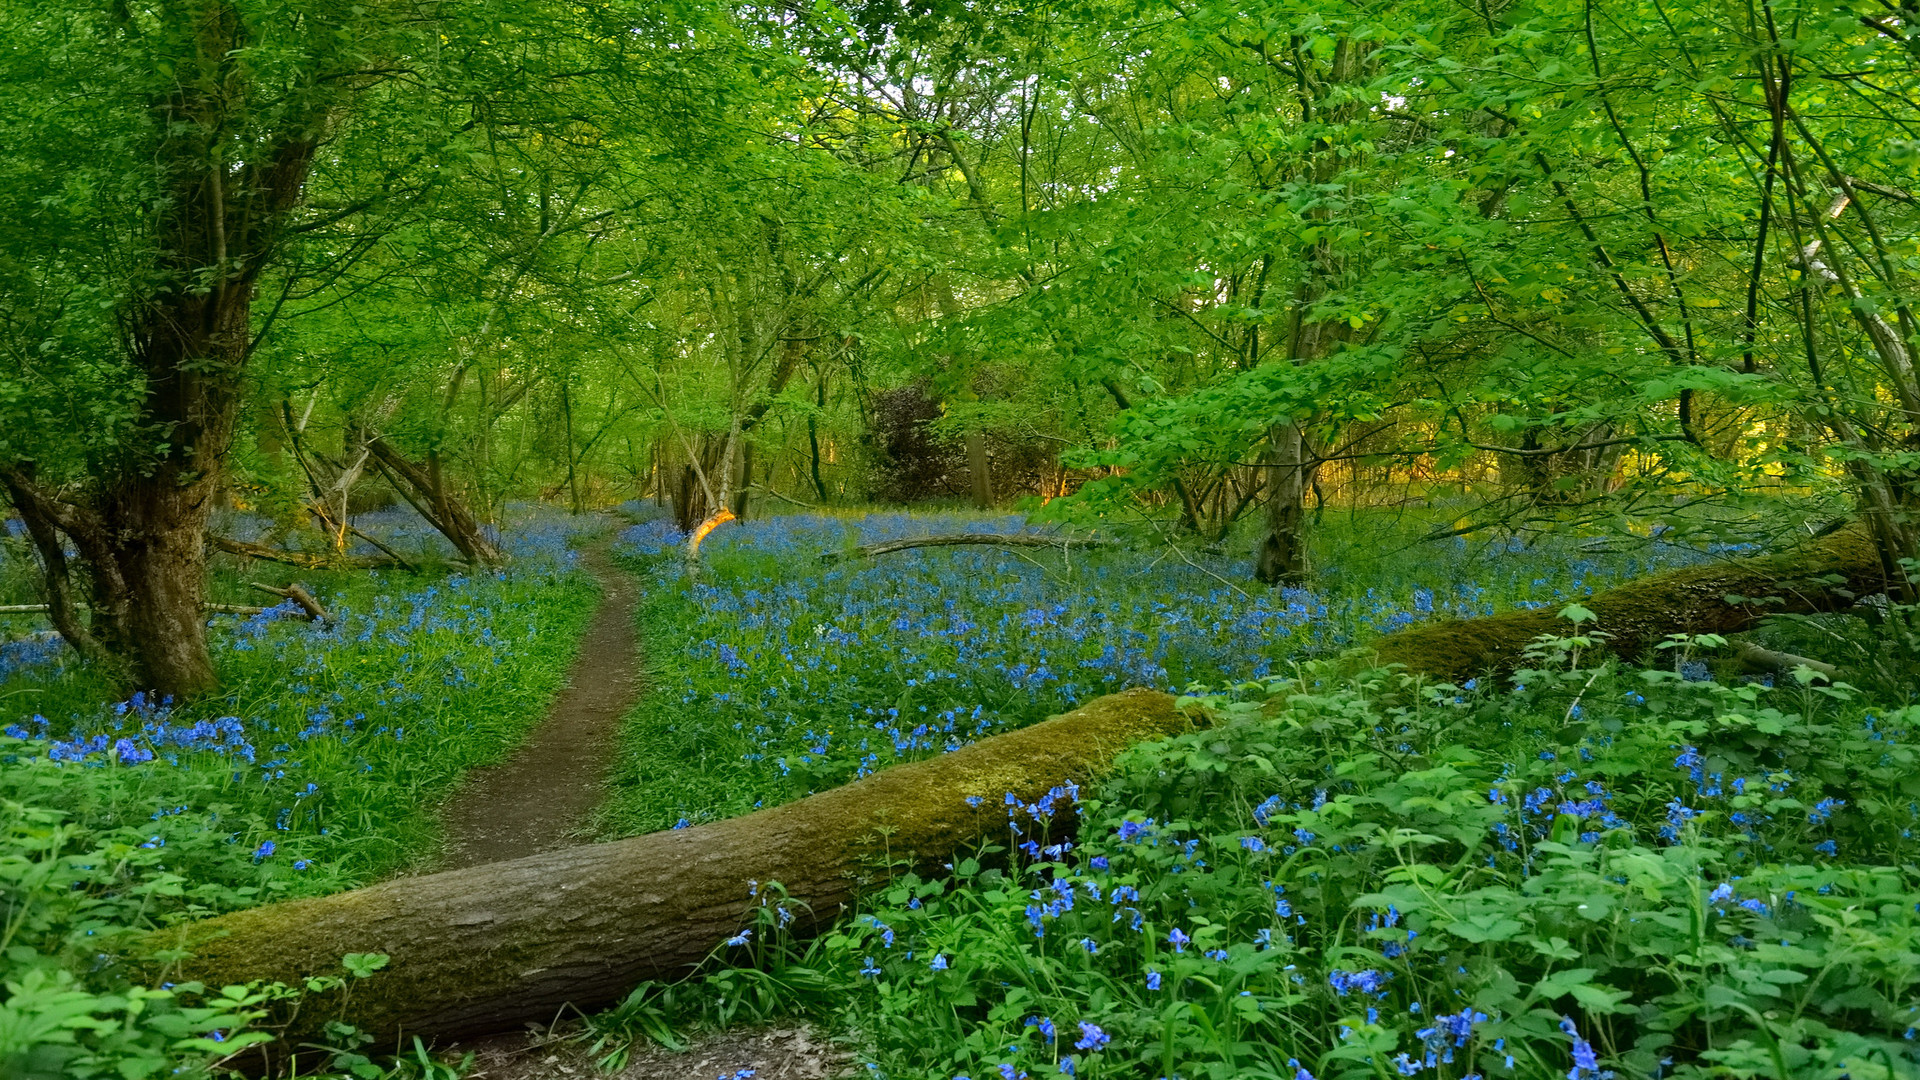 General 1920x1080 nature landscape forest trees flowers wildflowers grass path